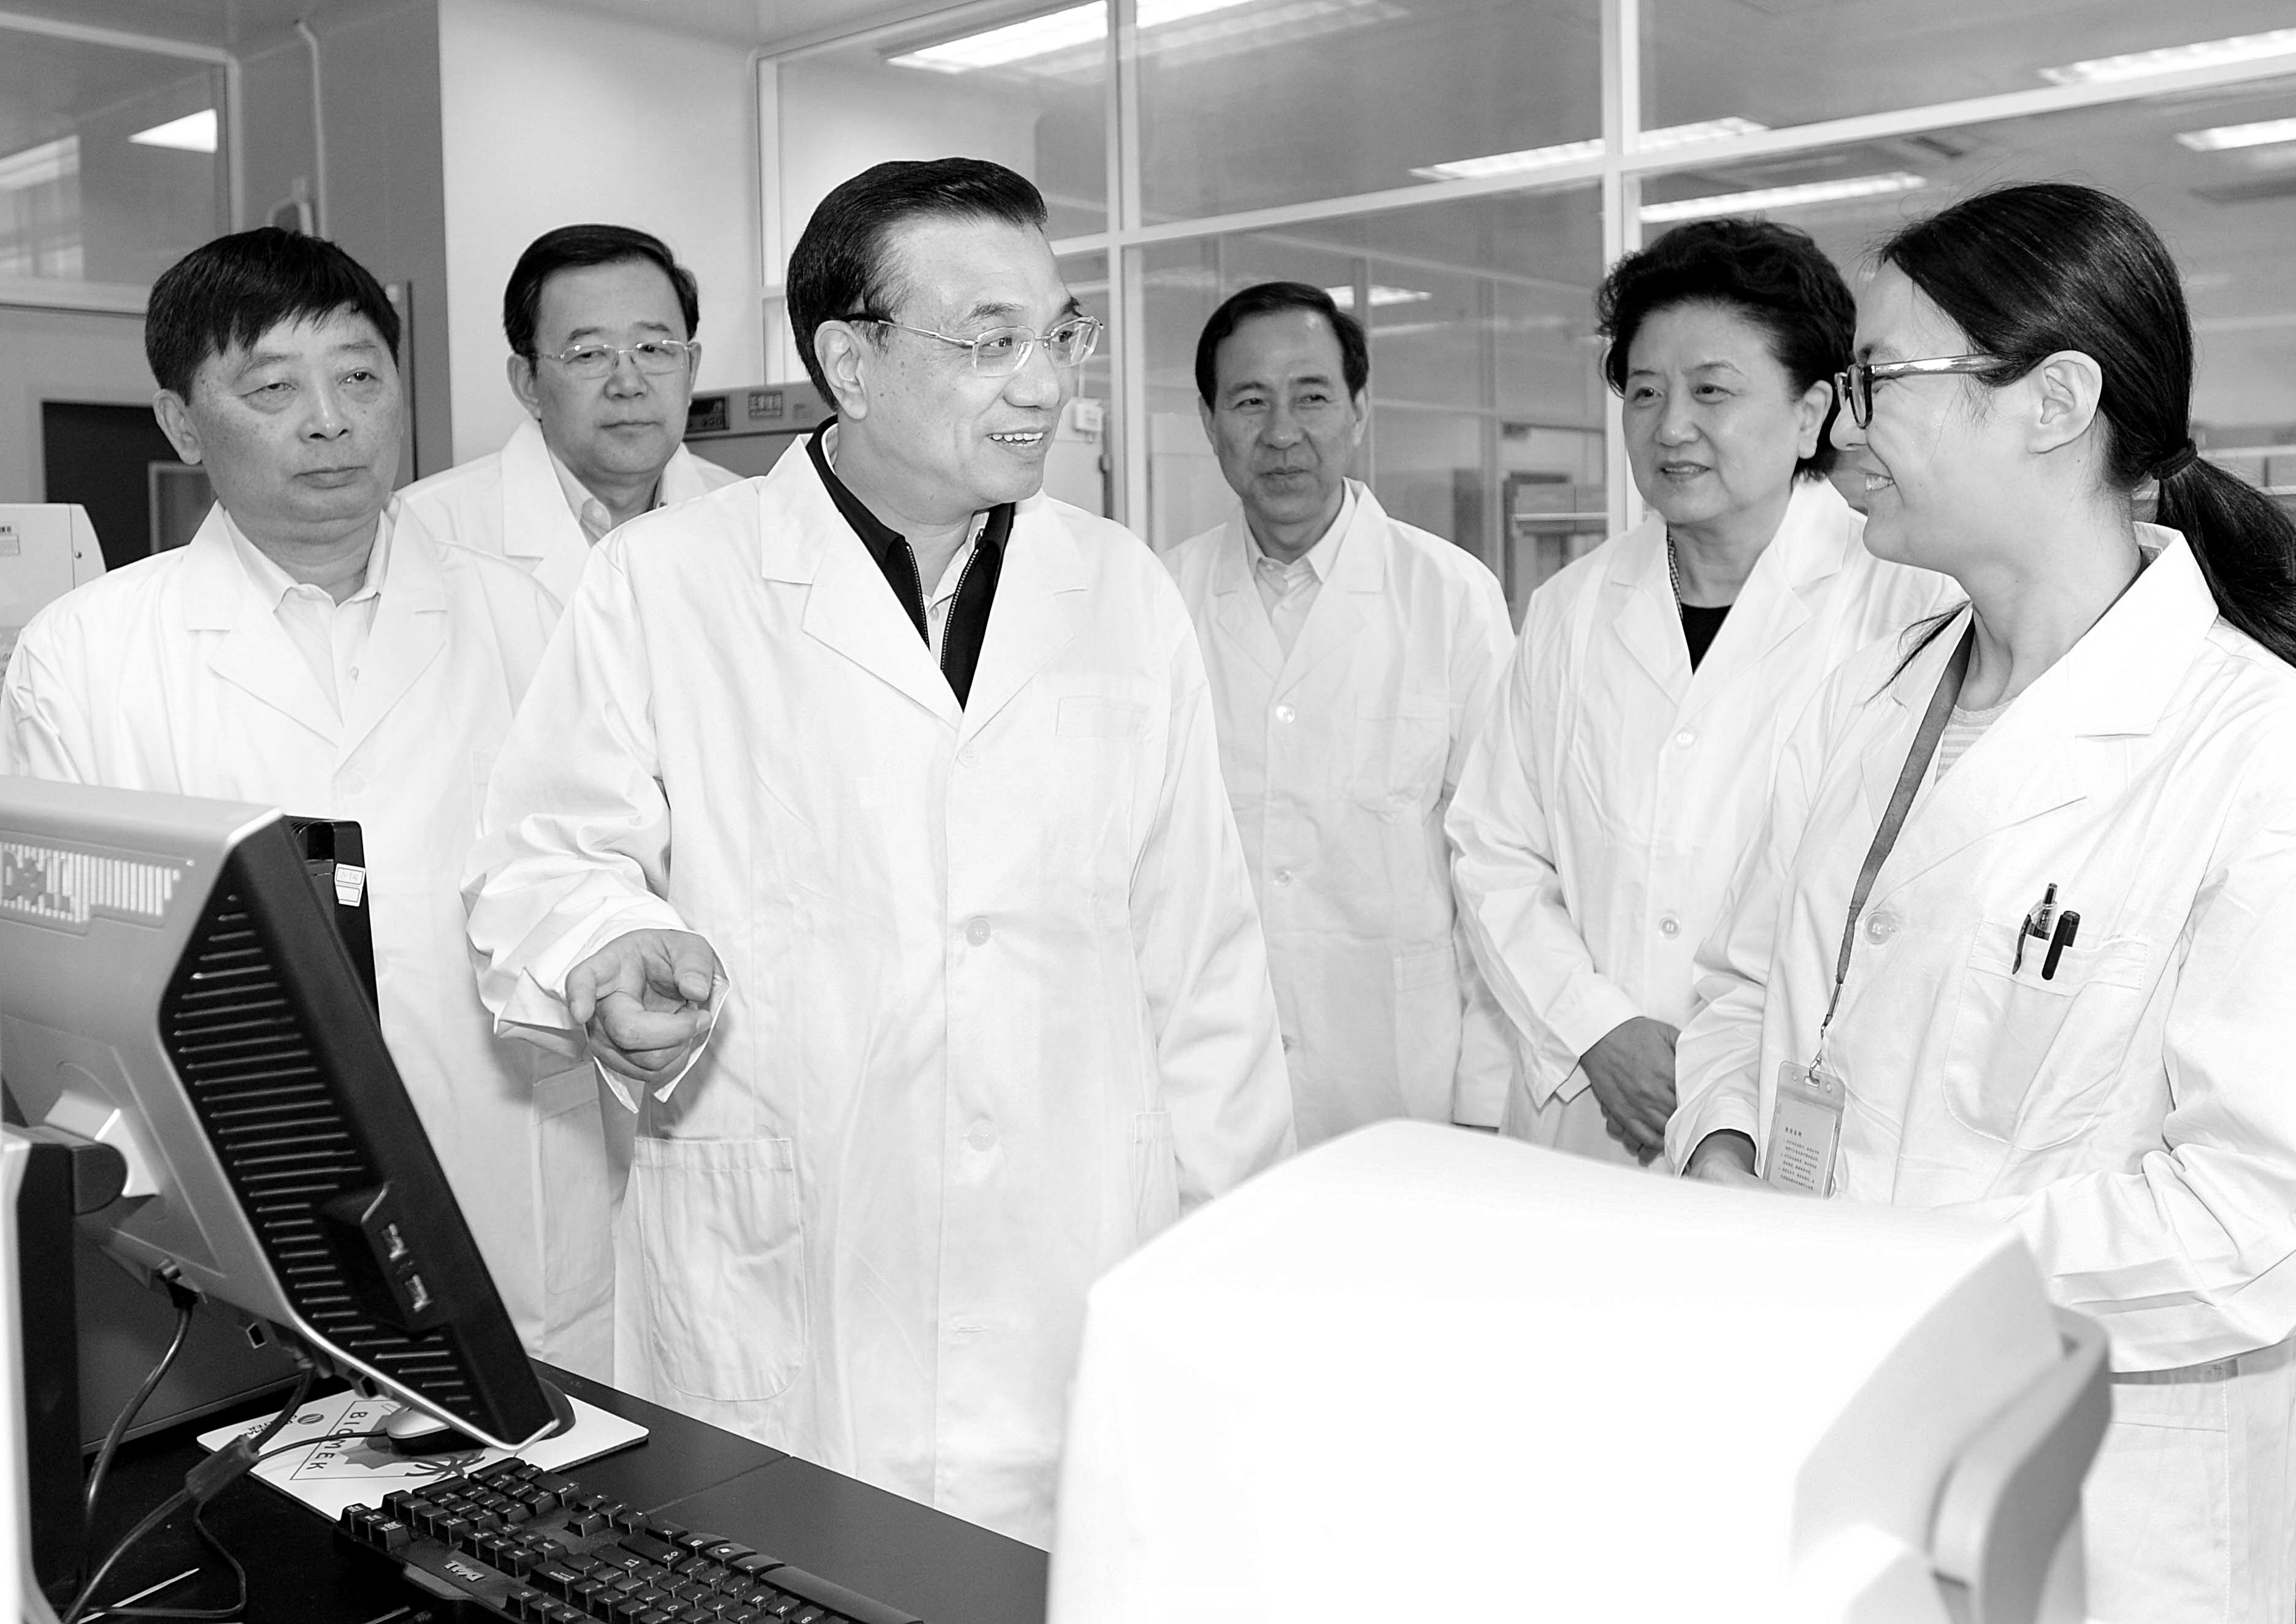 Premier Li Keqiang at a lab in the Chinese Centre for Disease Control and Prevention in Beijing in April 2013. Photo: Xinhua